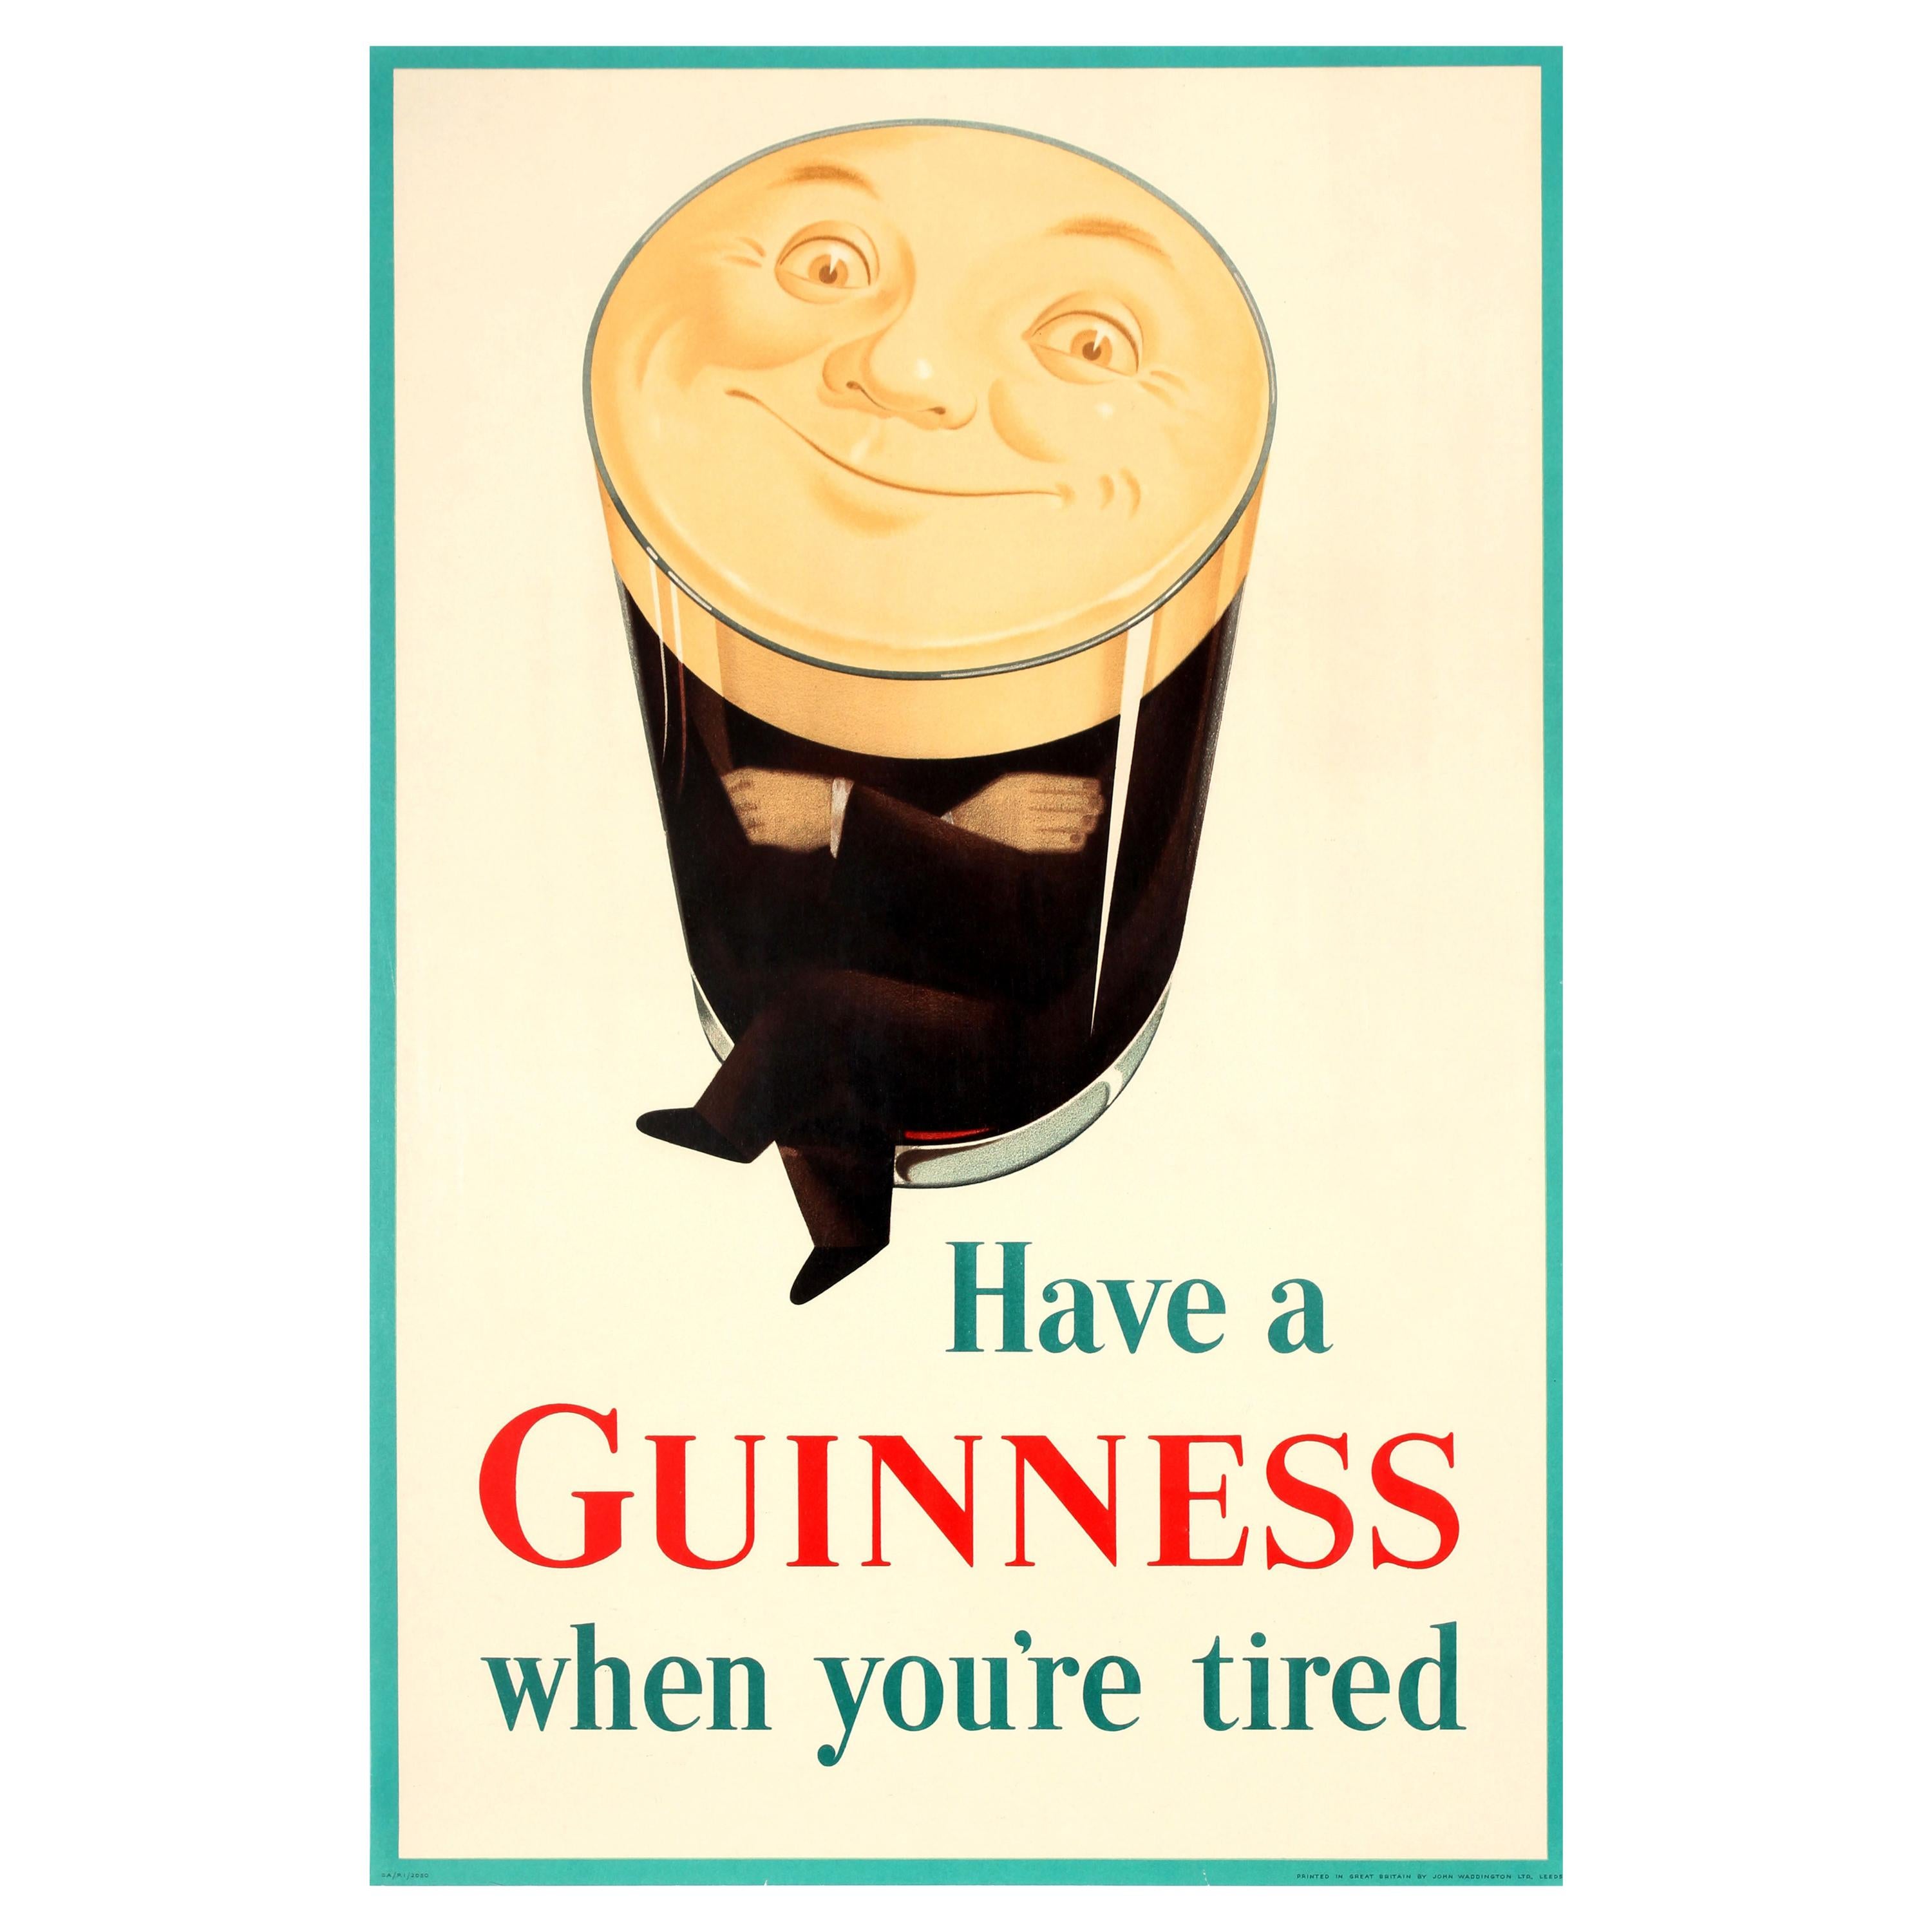 Original Vintage Drink Poster Have A Guinness When You're Tired Smiling Pint Man